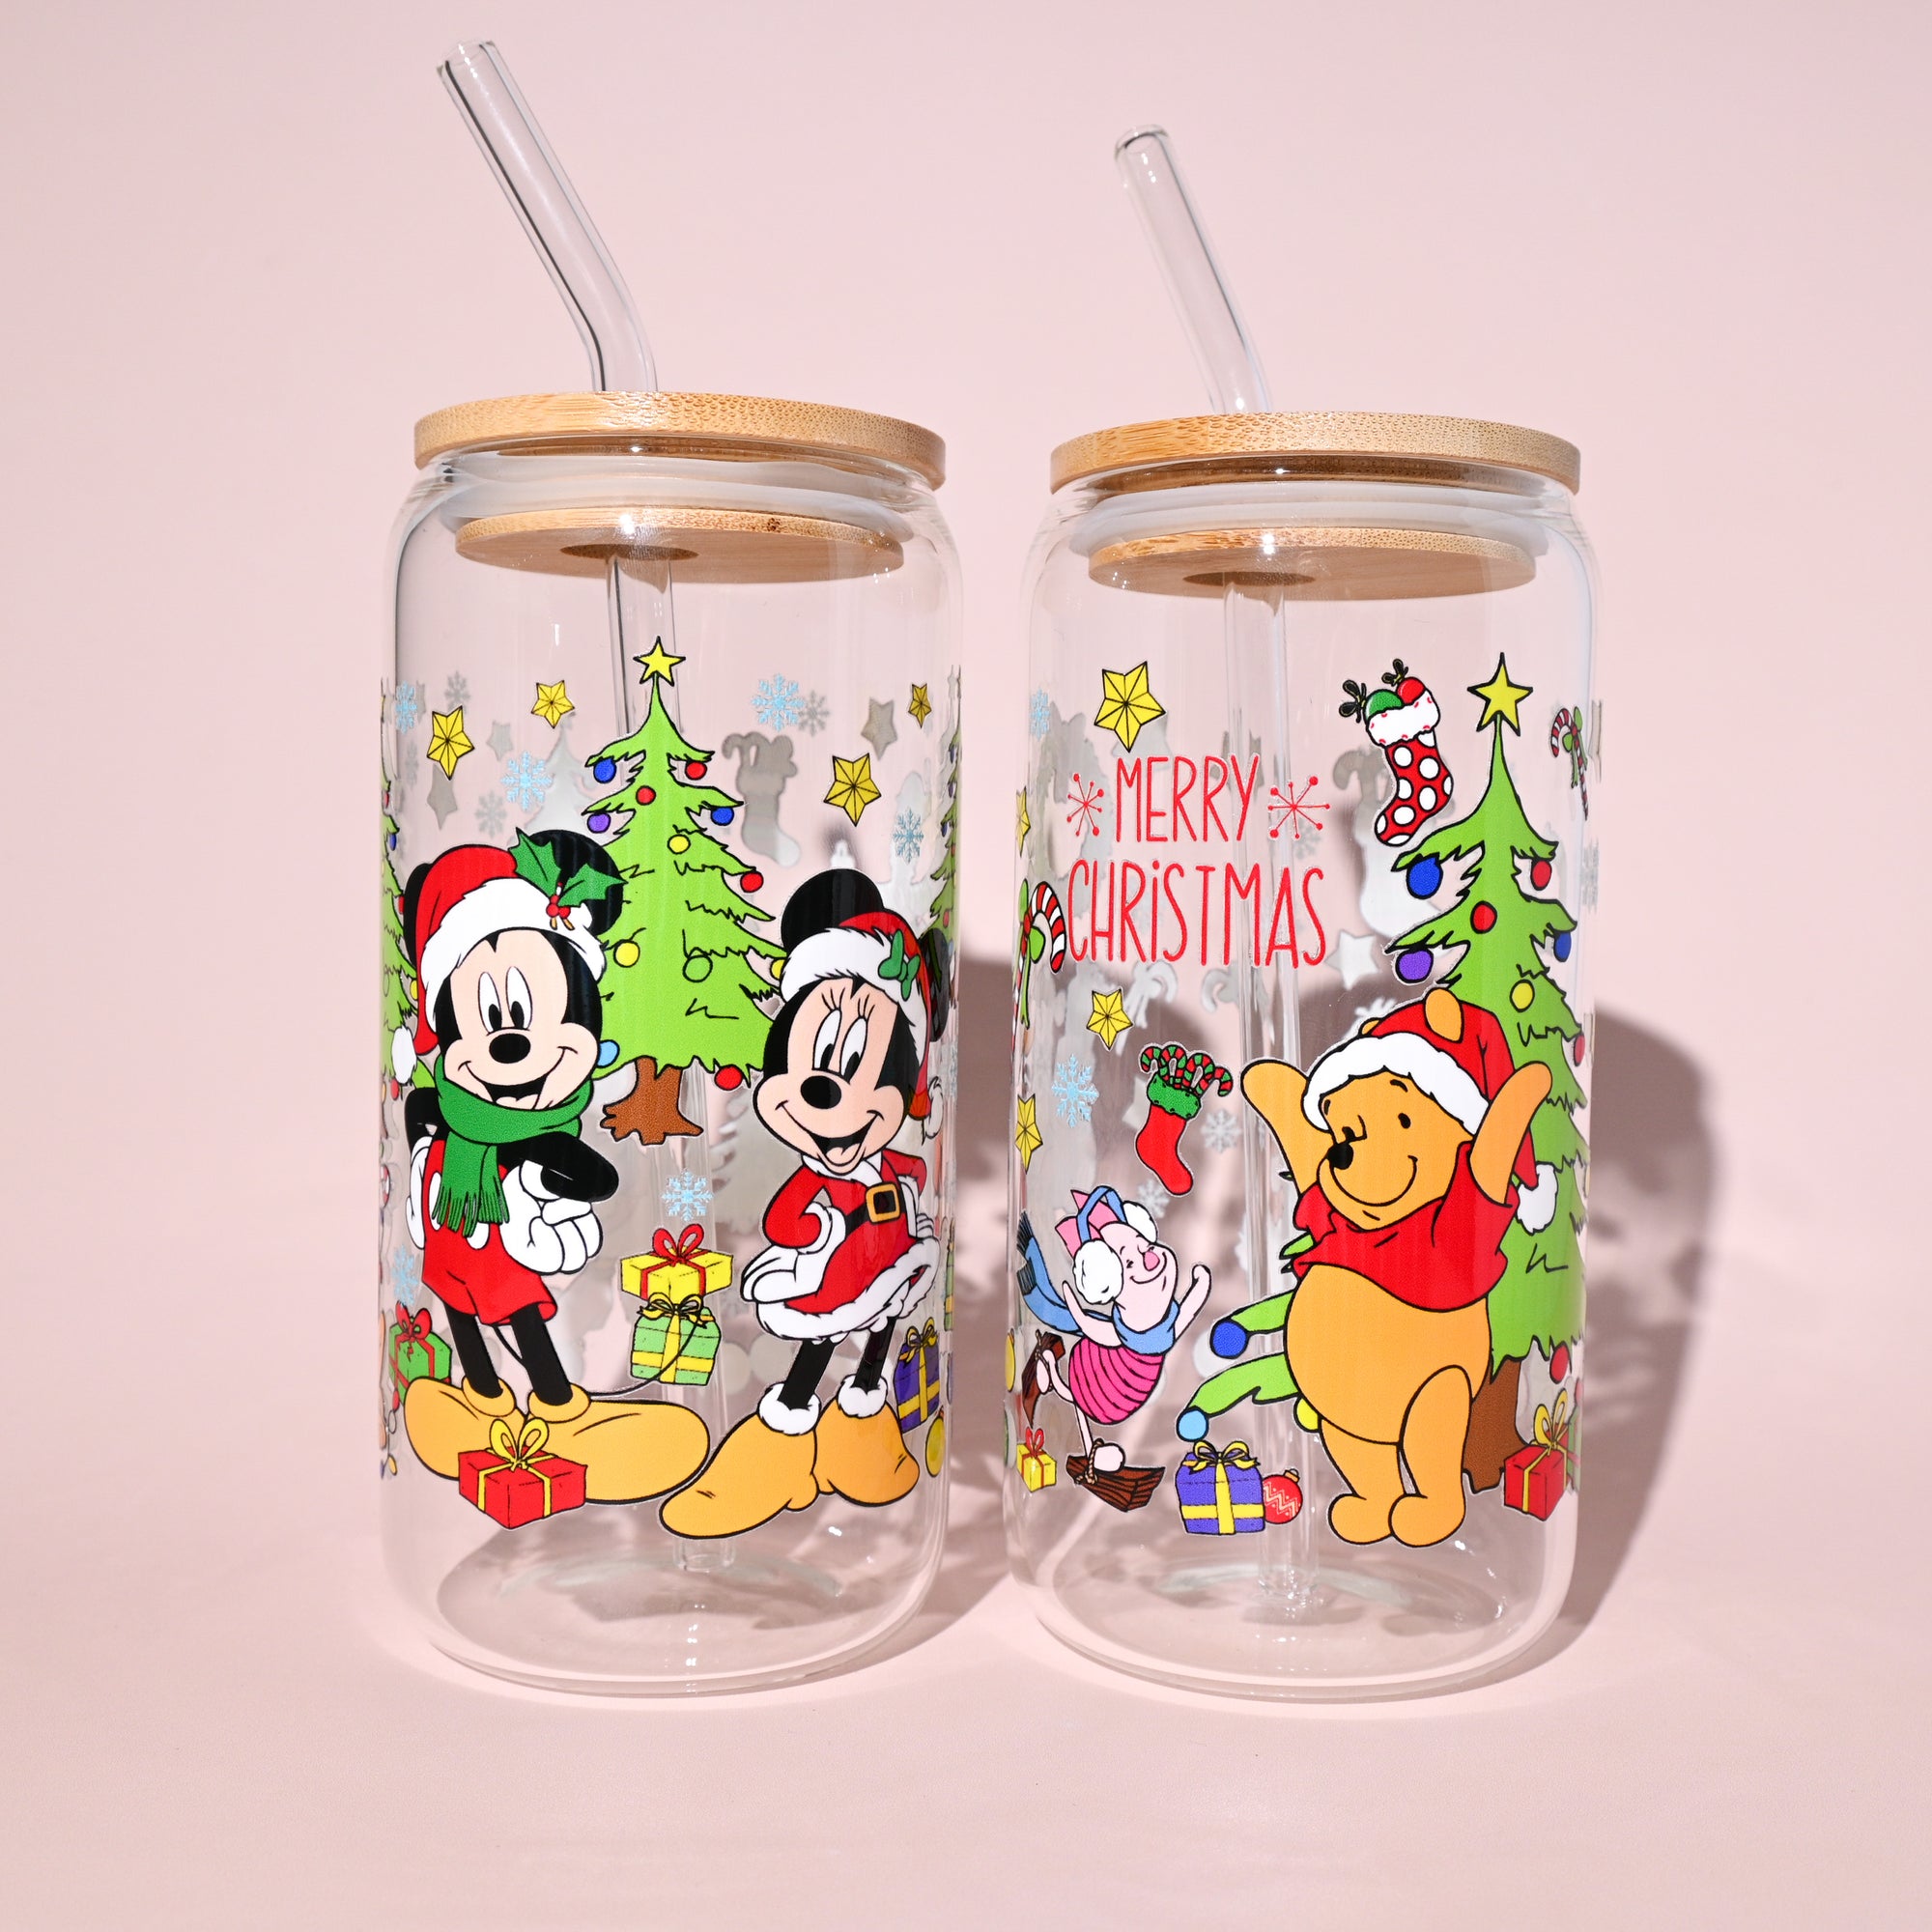 Pooh & Friends Christmas Plastic or Glass Tumbler